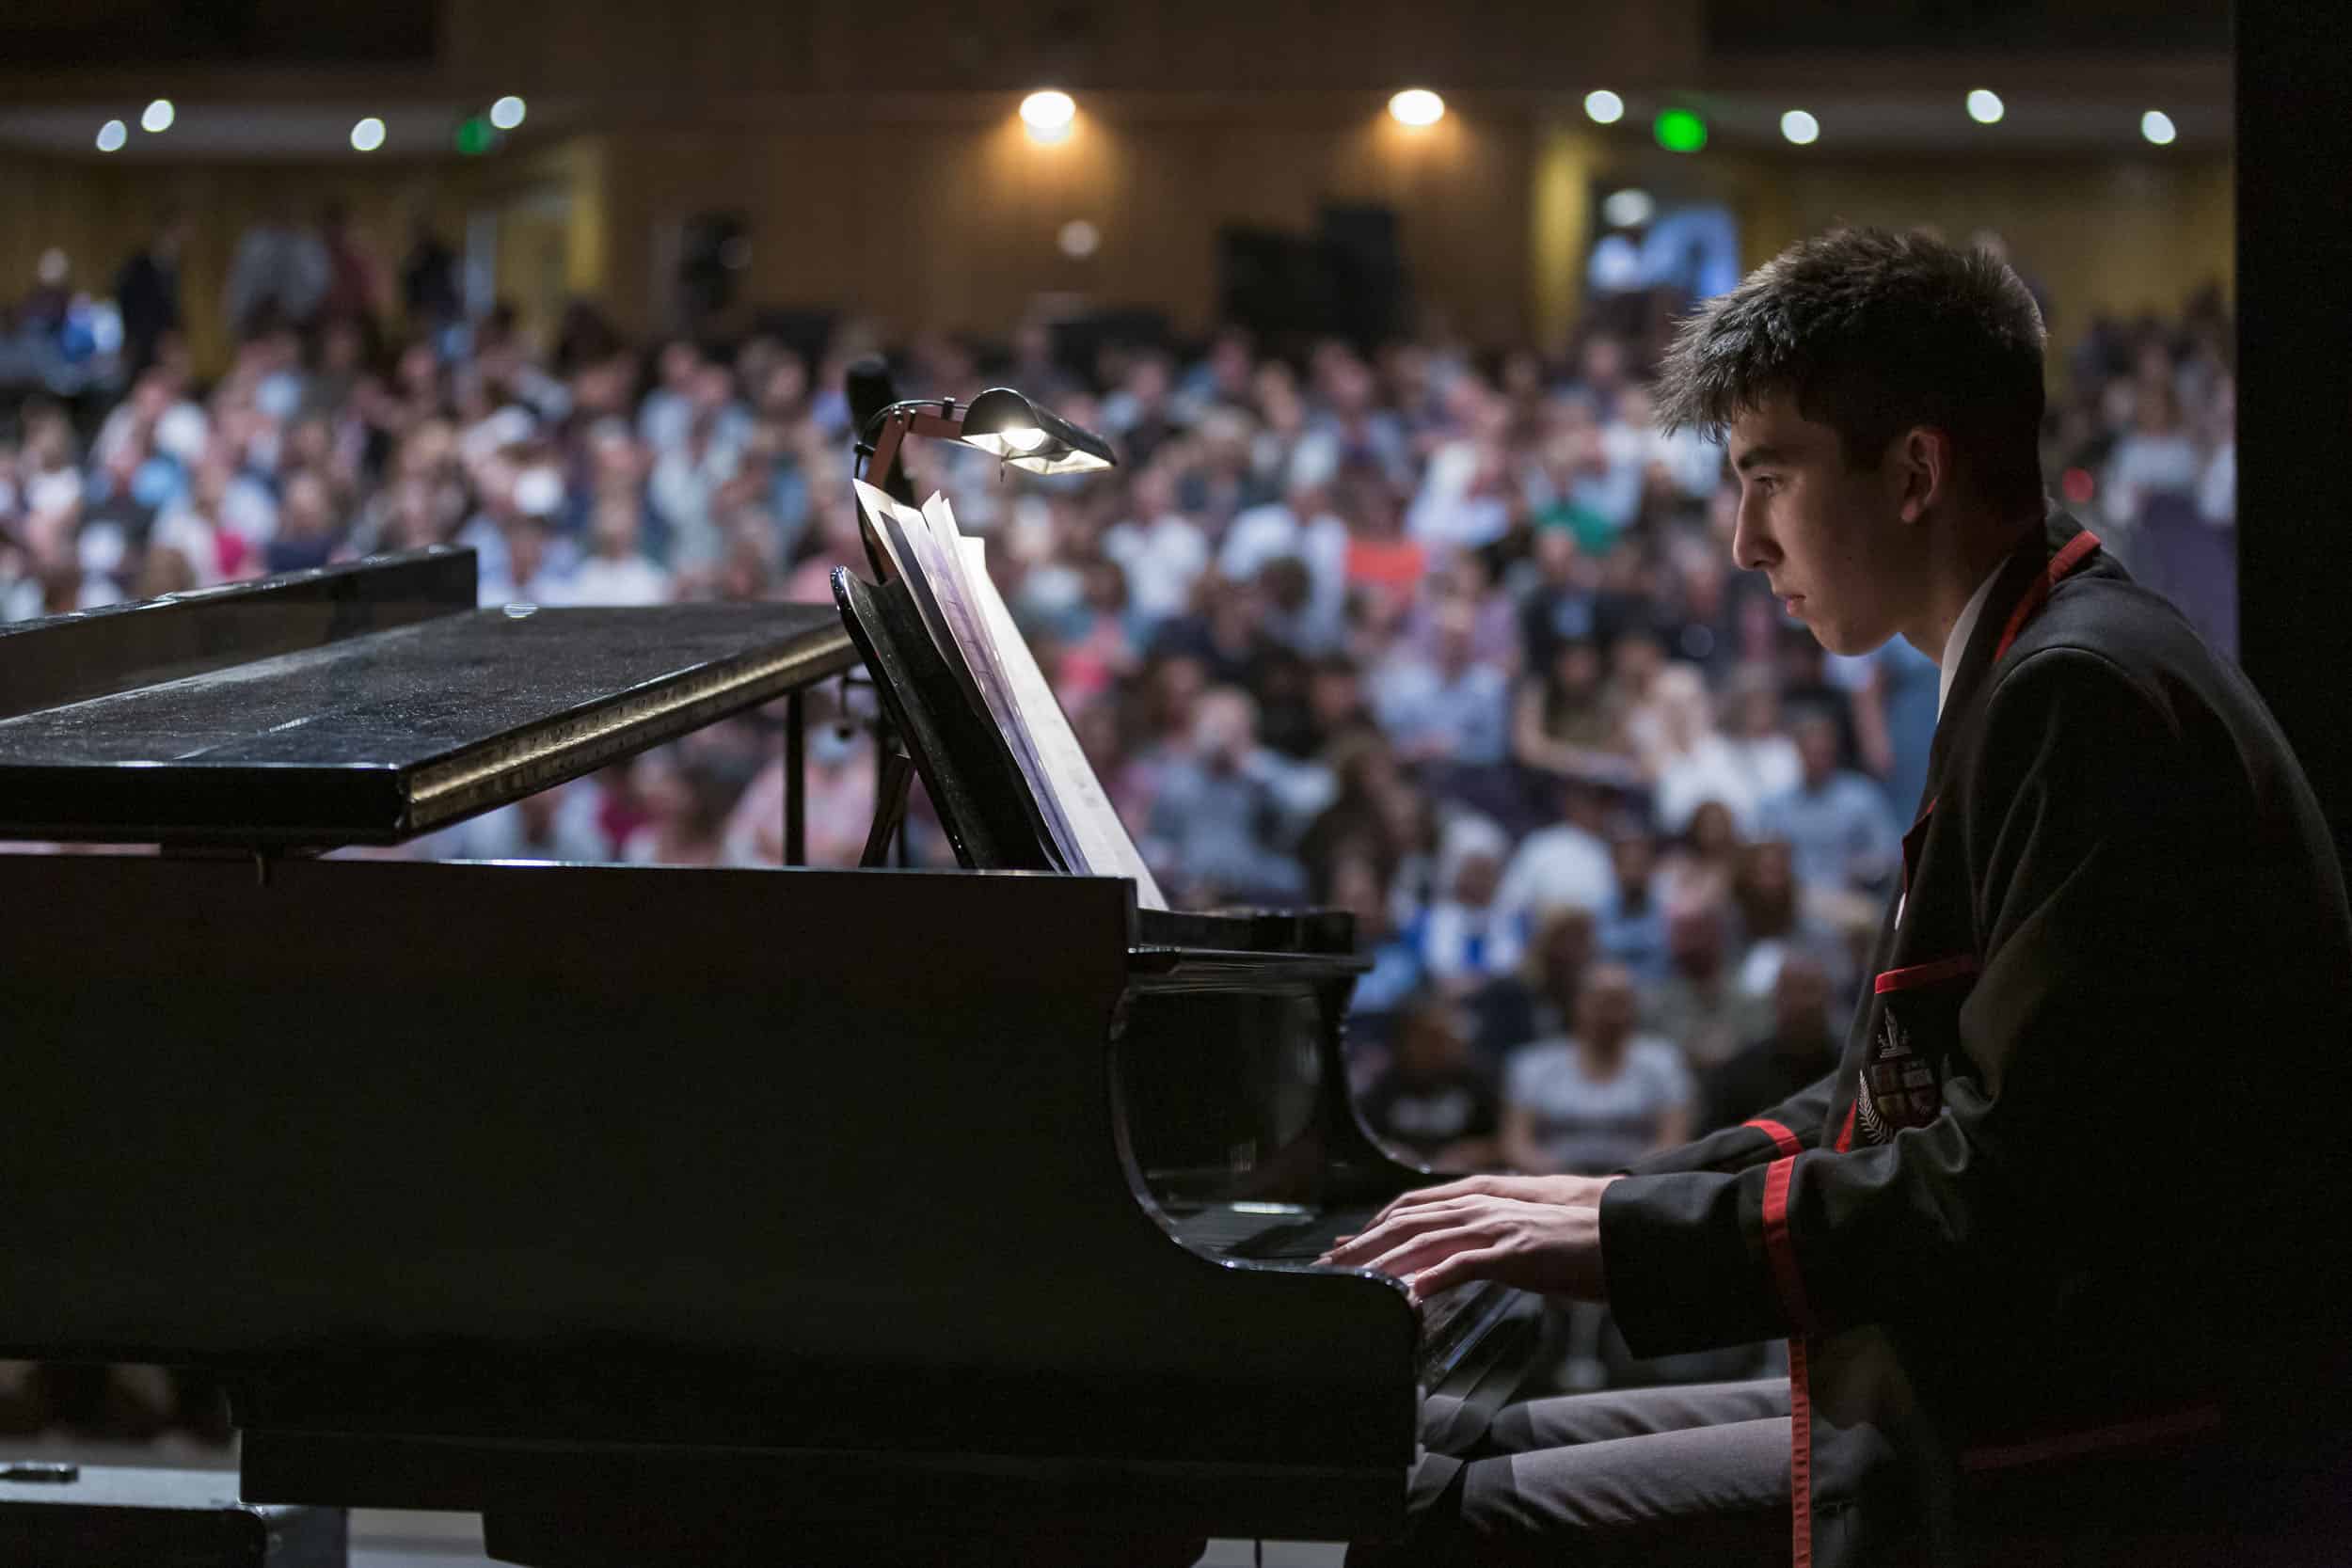 Male high school student performs a piano recital on stage at an awards function.